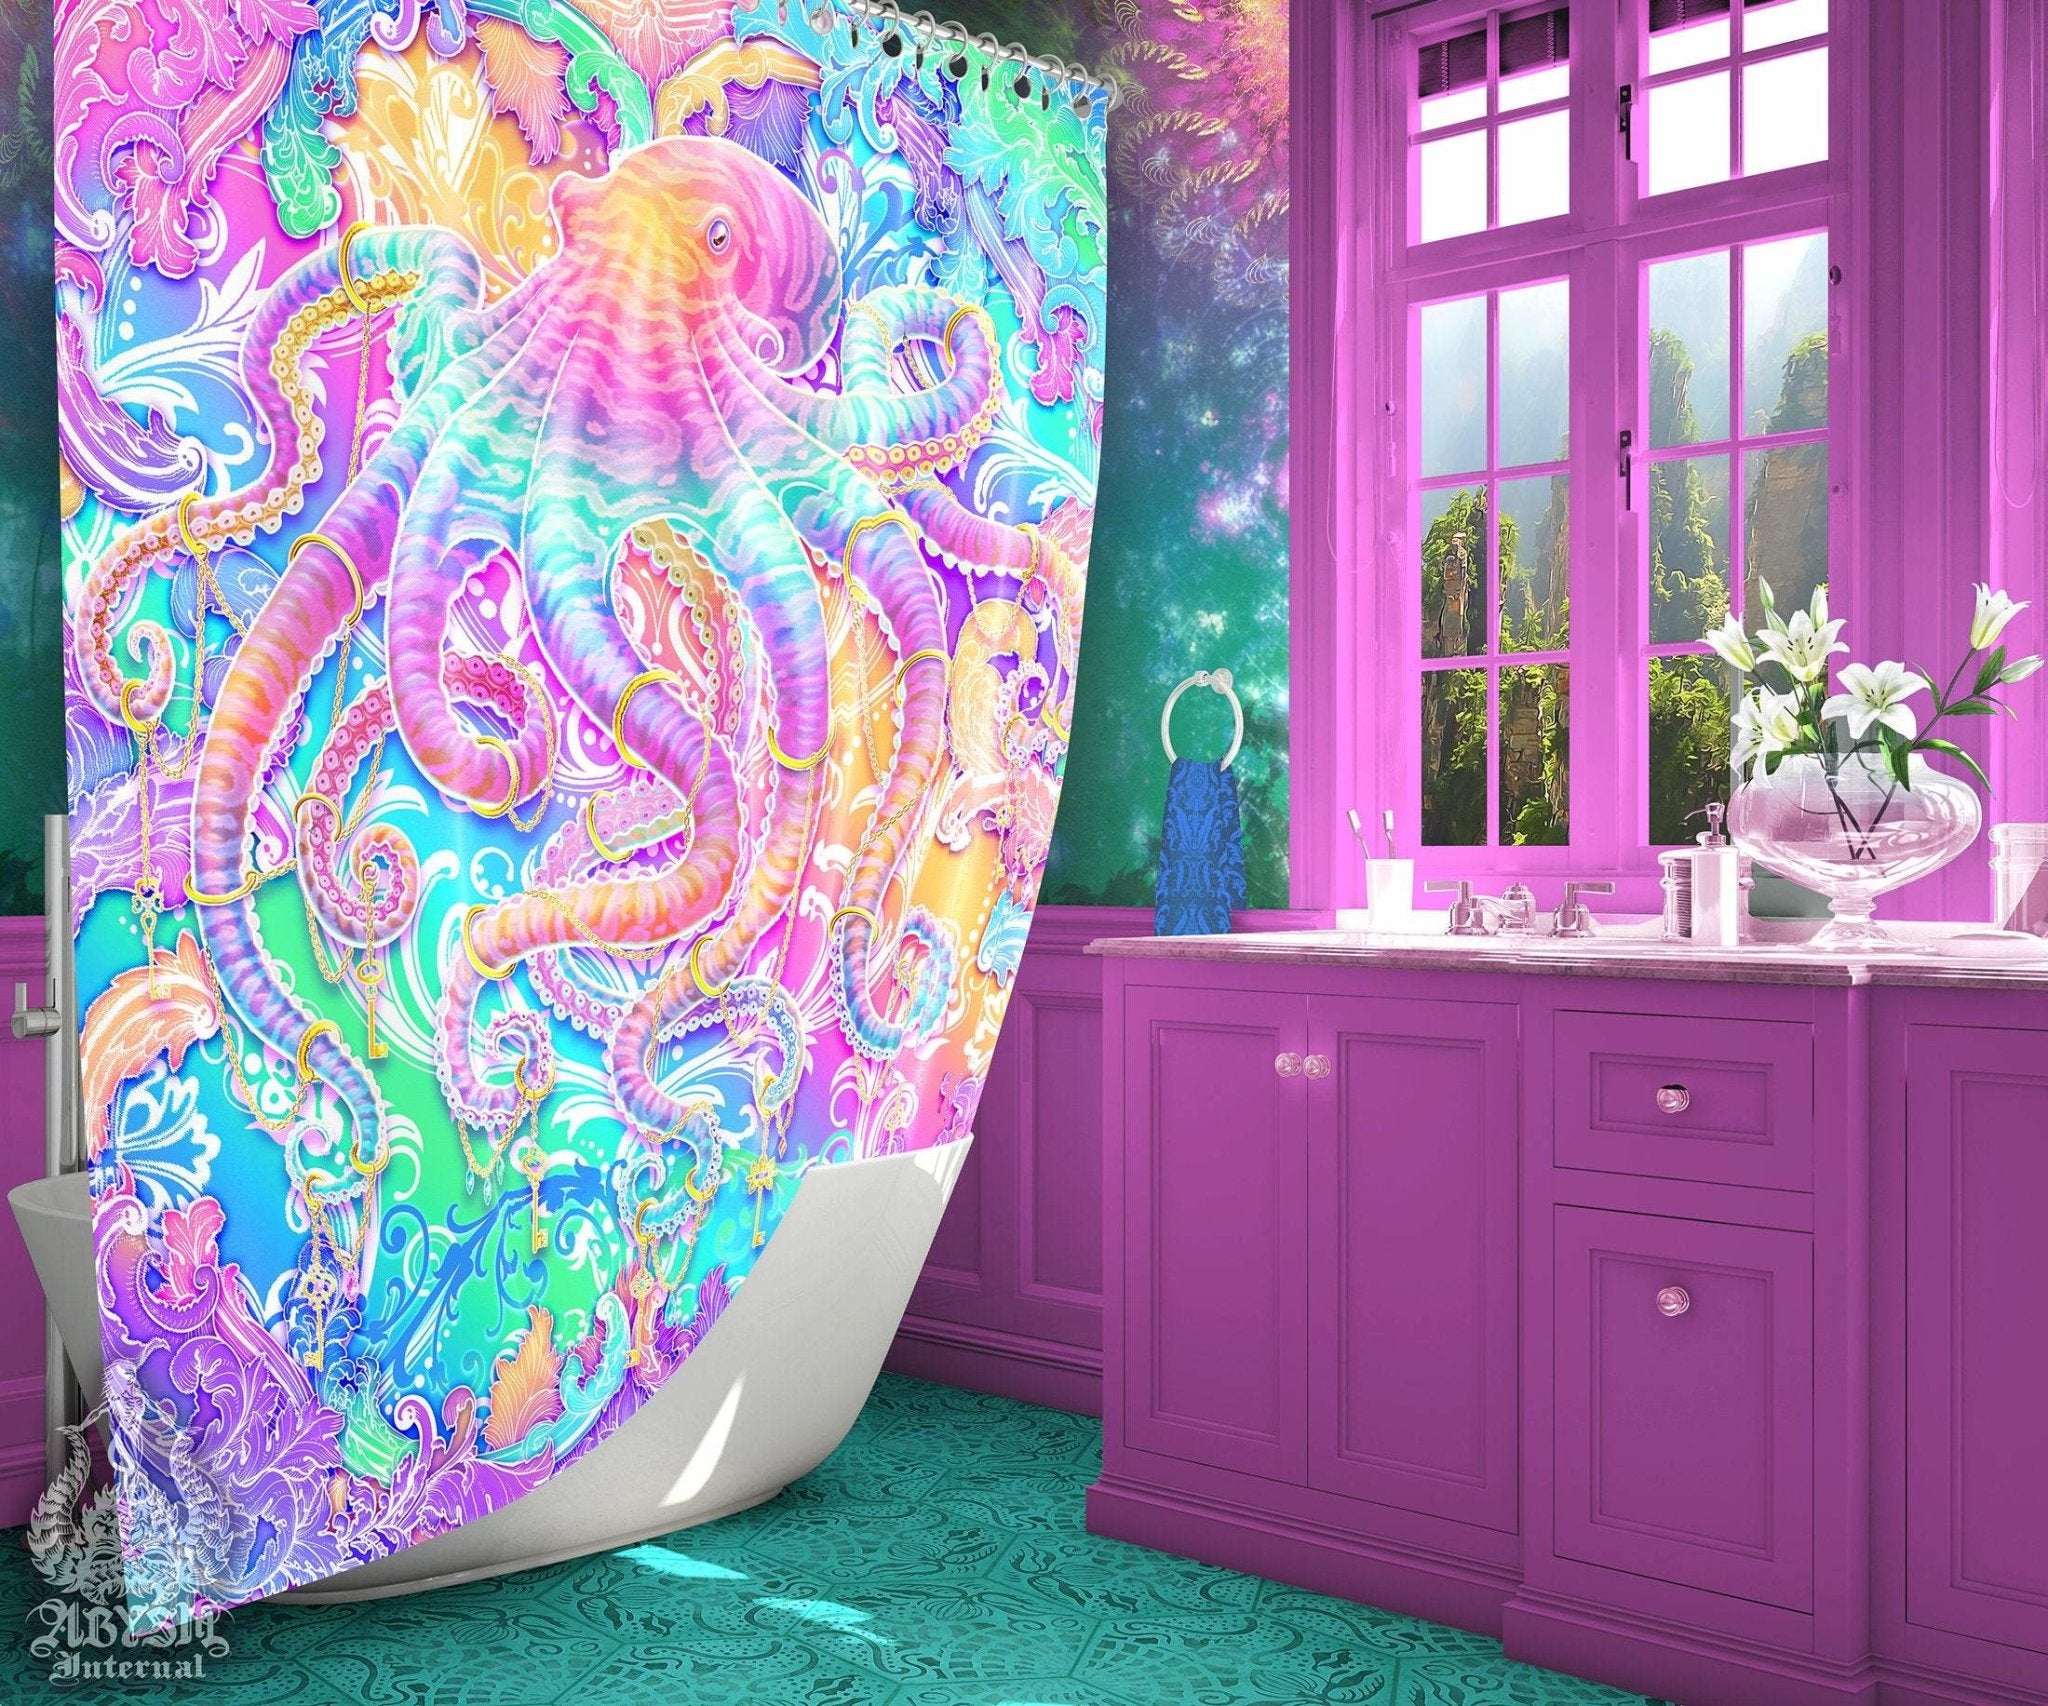 Kawaii Shower Curtain, Psychedelic and Holographic Bathroom Decor, Pastel Octopus, Eclectic and Funky Home - Aesthetic style, Yume Kawaii, Fairy Kei - Abysm Internal